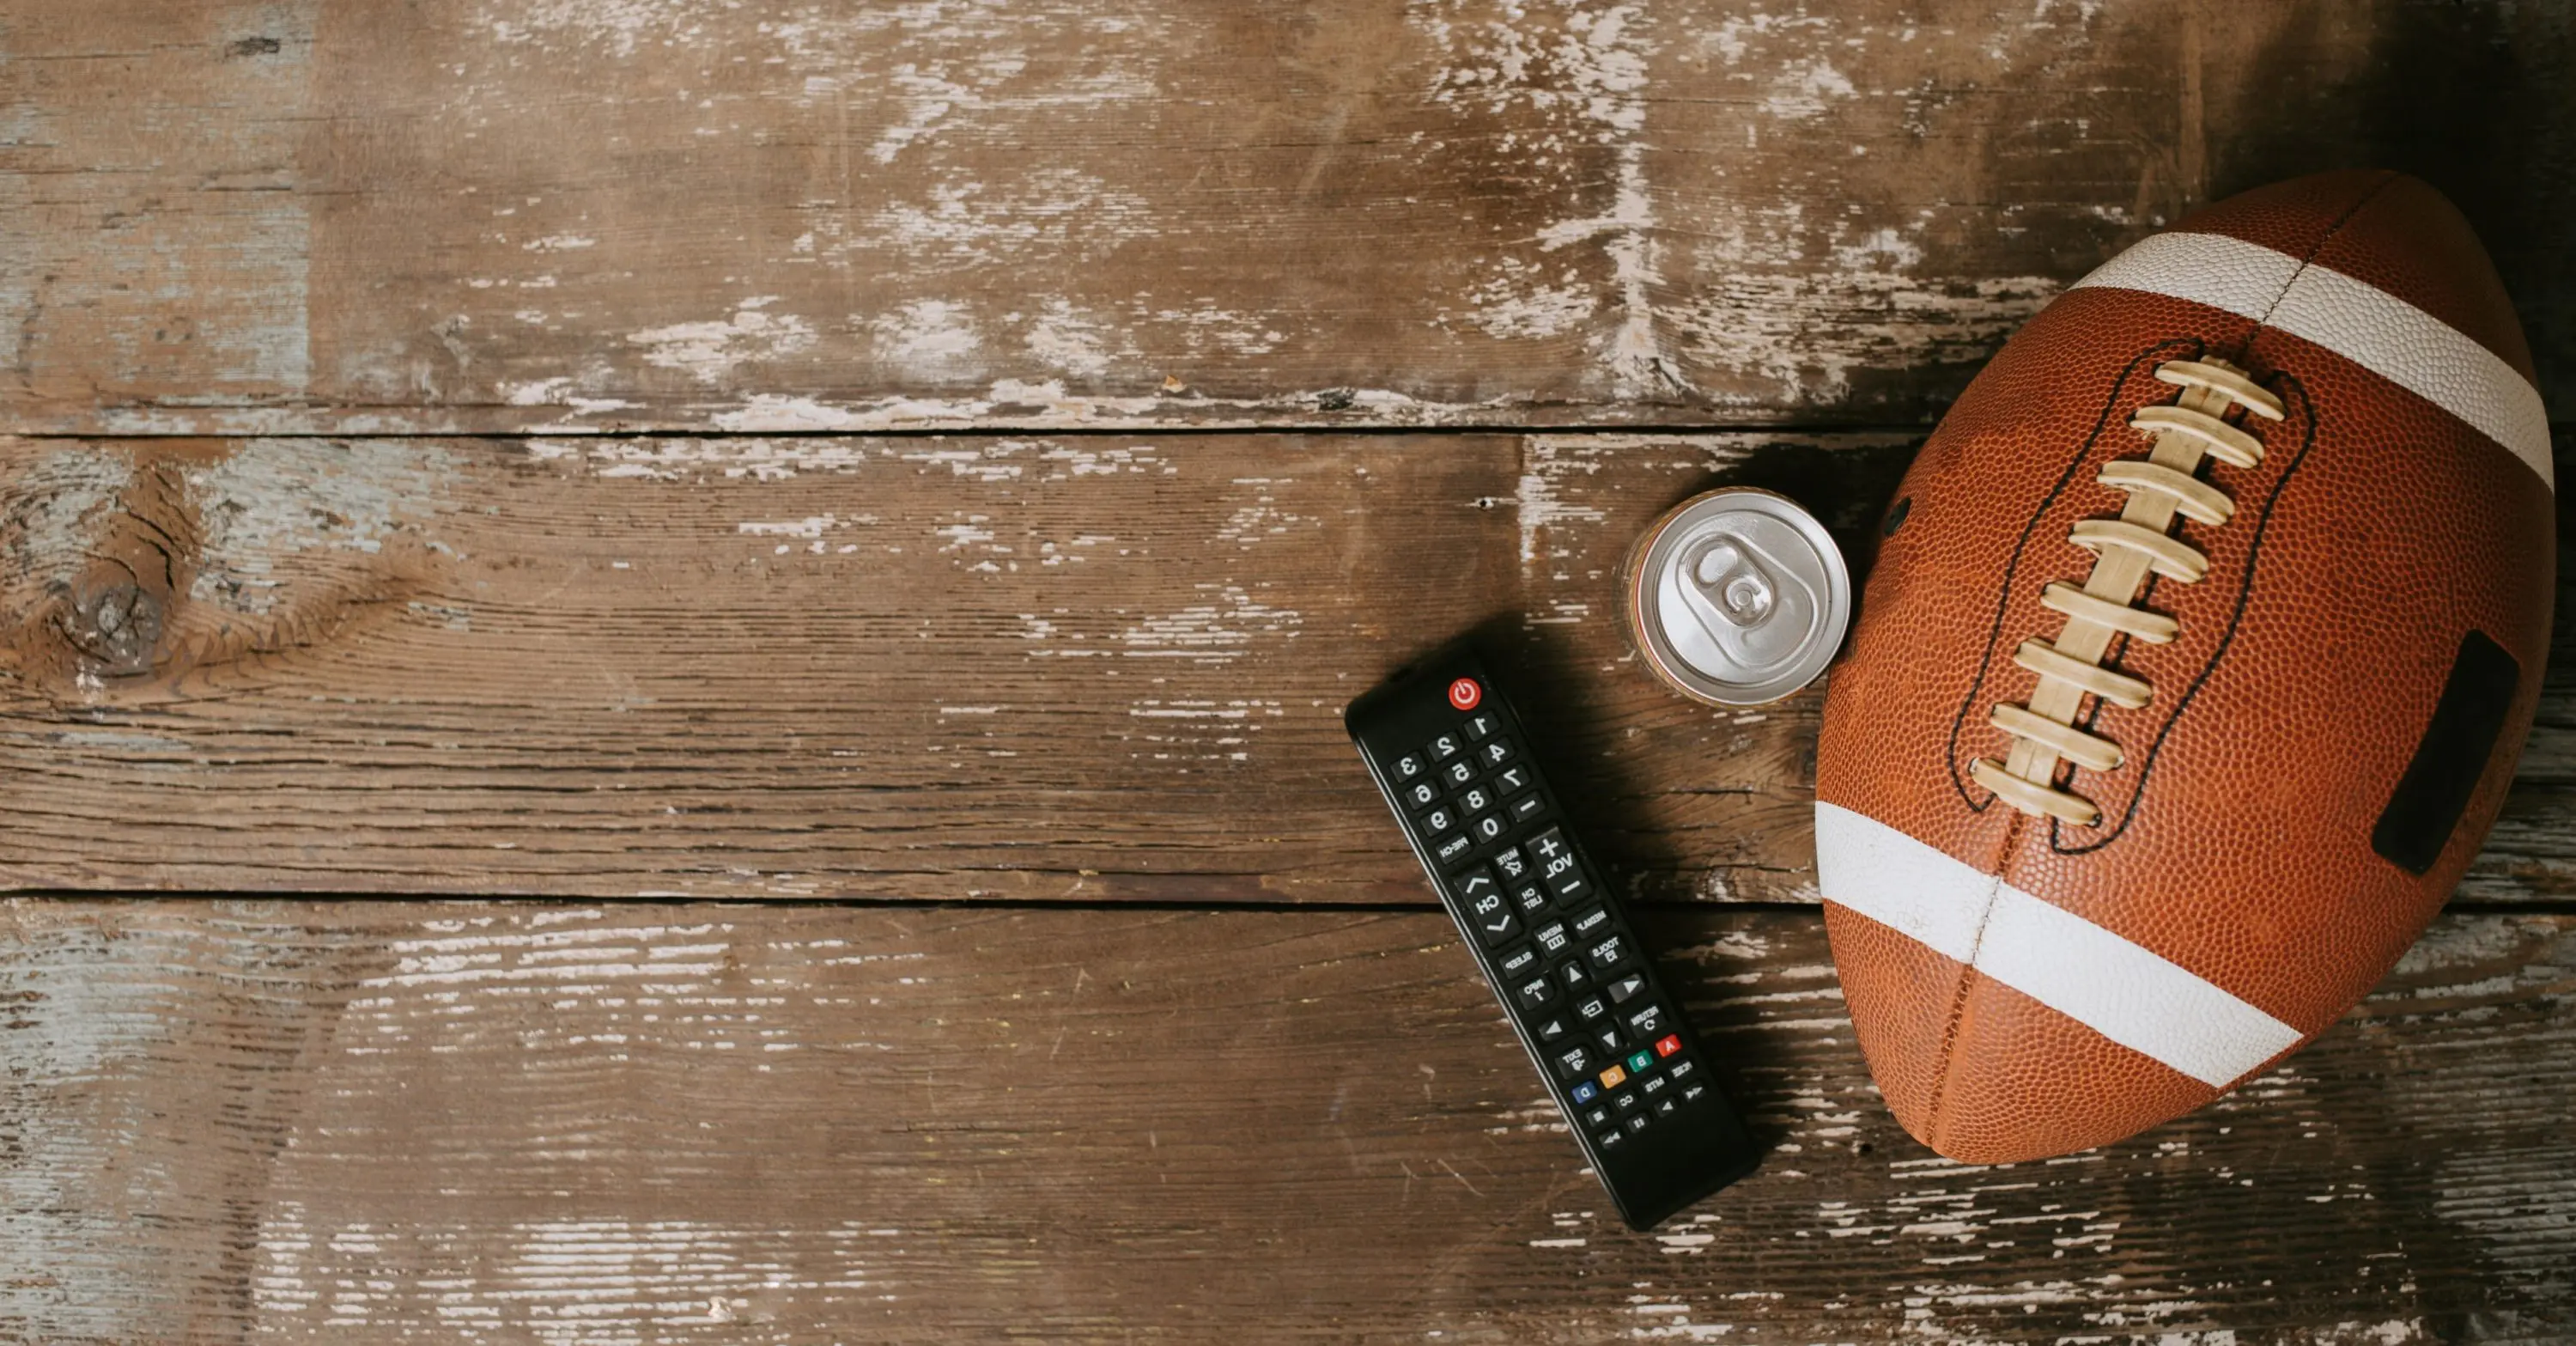 Football with a remote to watch big game parties in Las Vegas